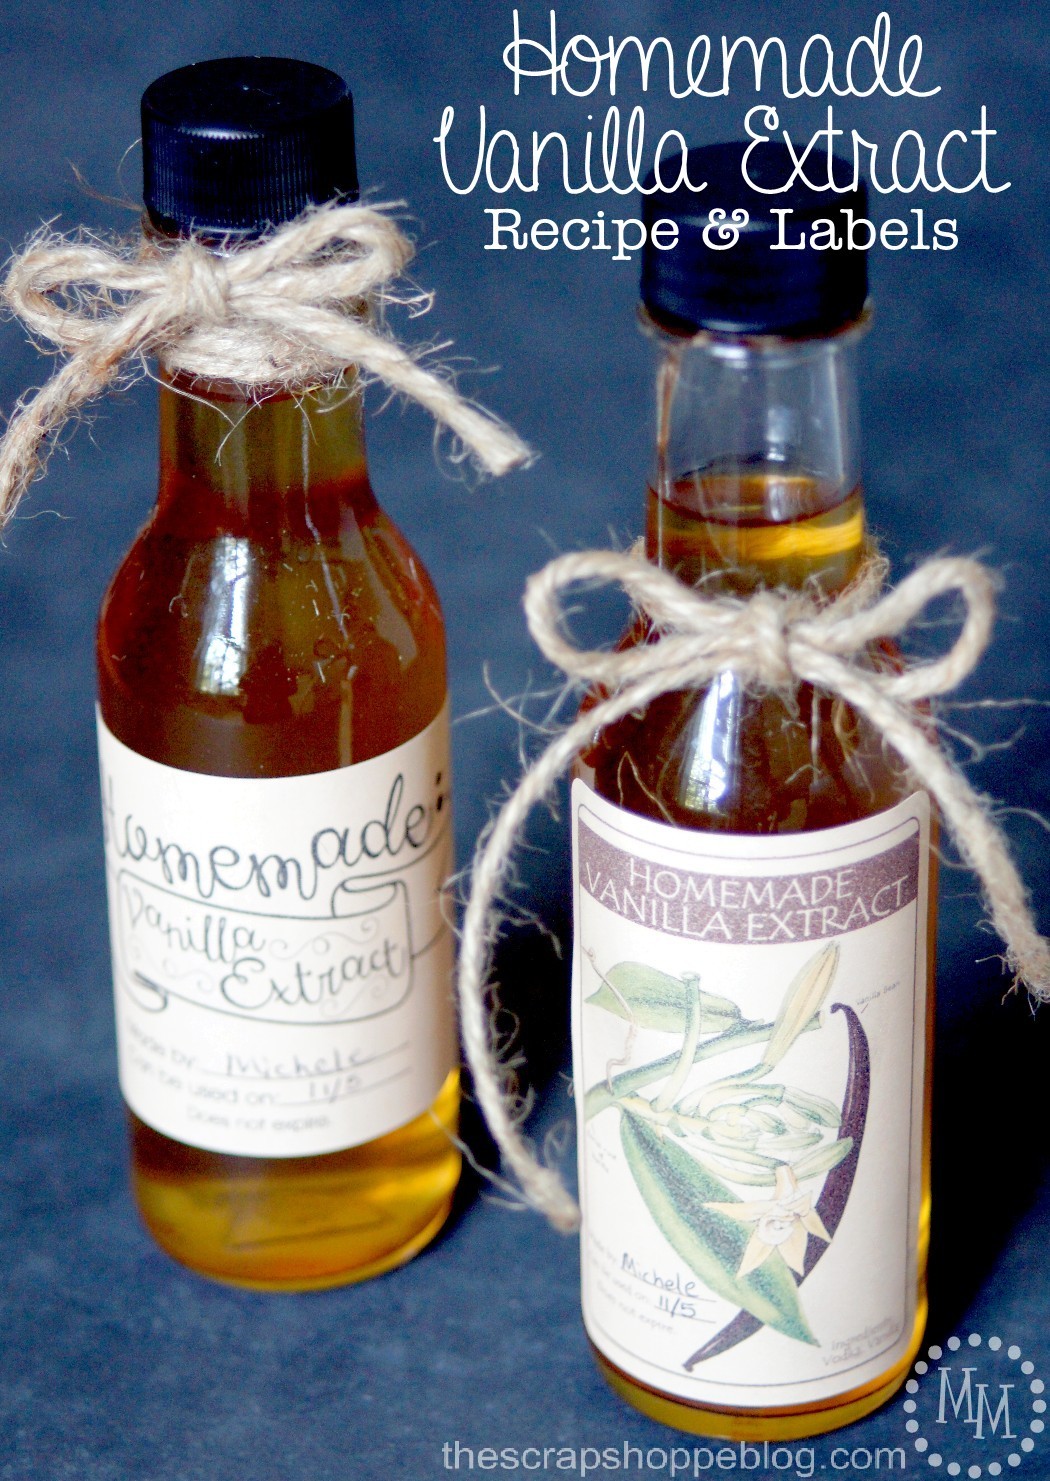 Welcome to Pretty Pintastic Party #173 & A Flavorful Gift Idea. My favorite pick from last week is this Homemade Vanilla Extract Recipe & Labels